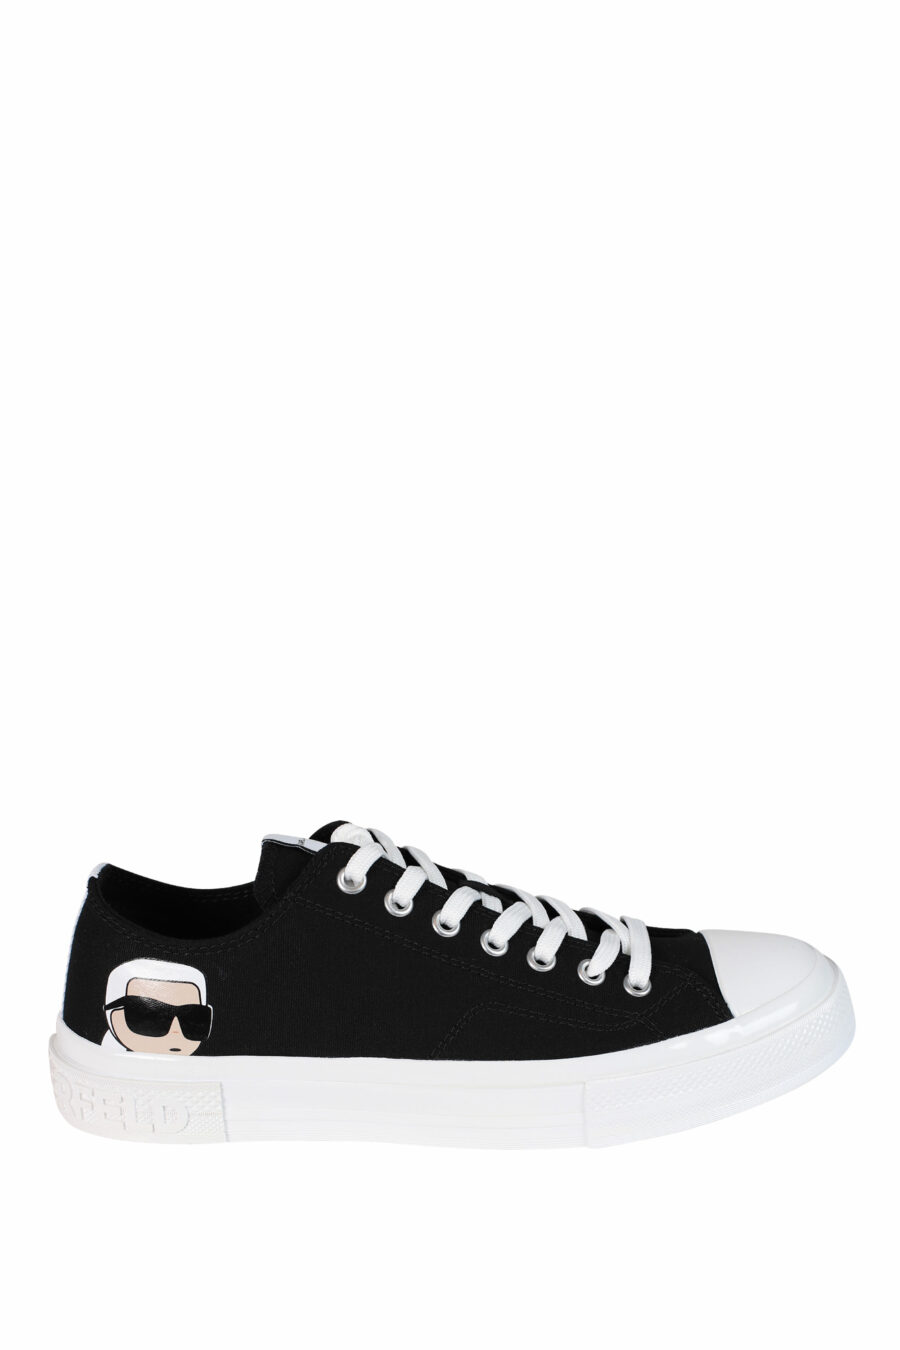 Black trainers with "karl" logo and white sole - 5059529249655